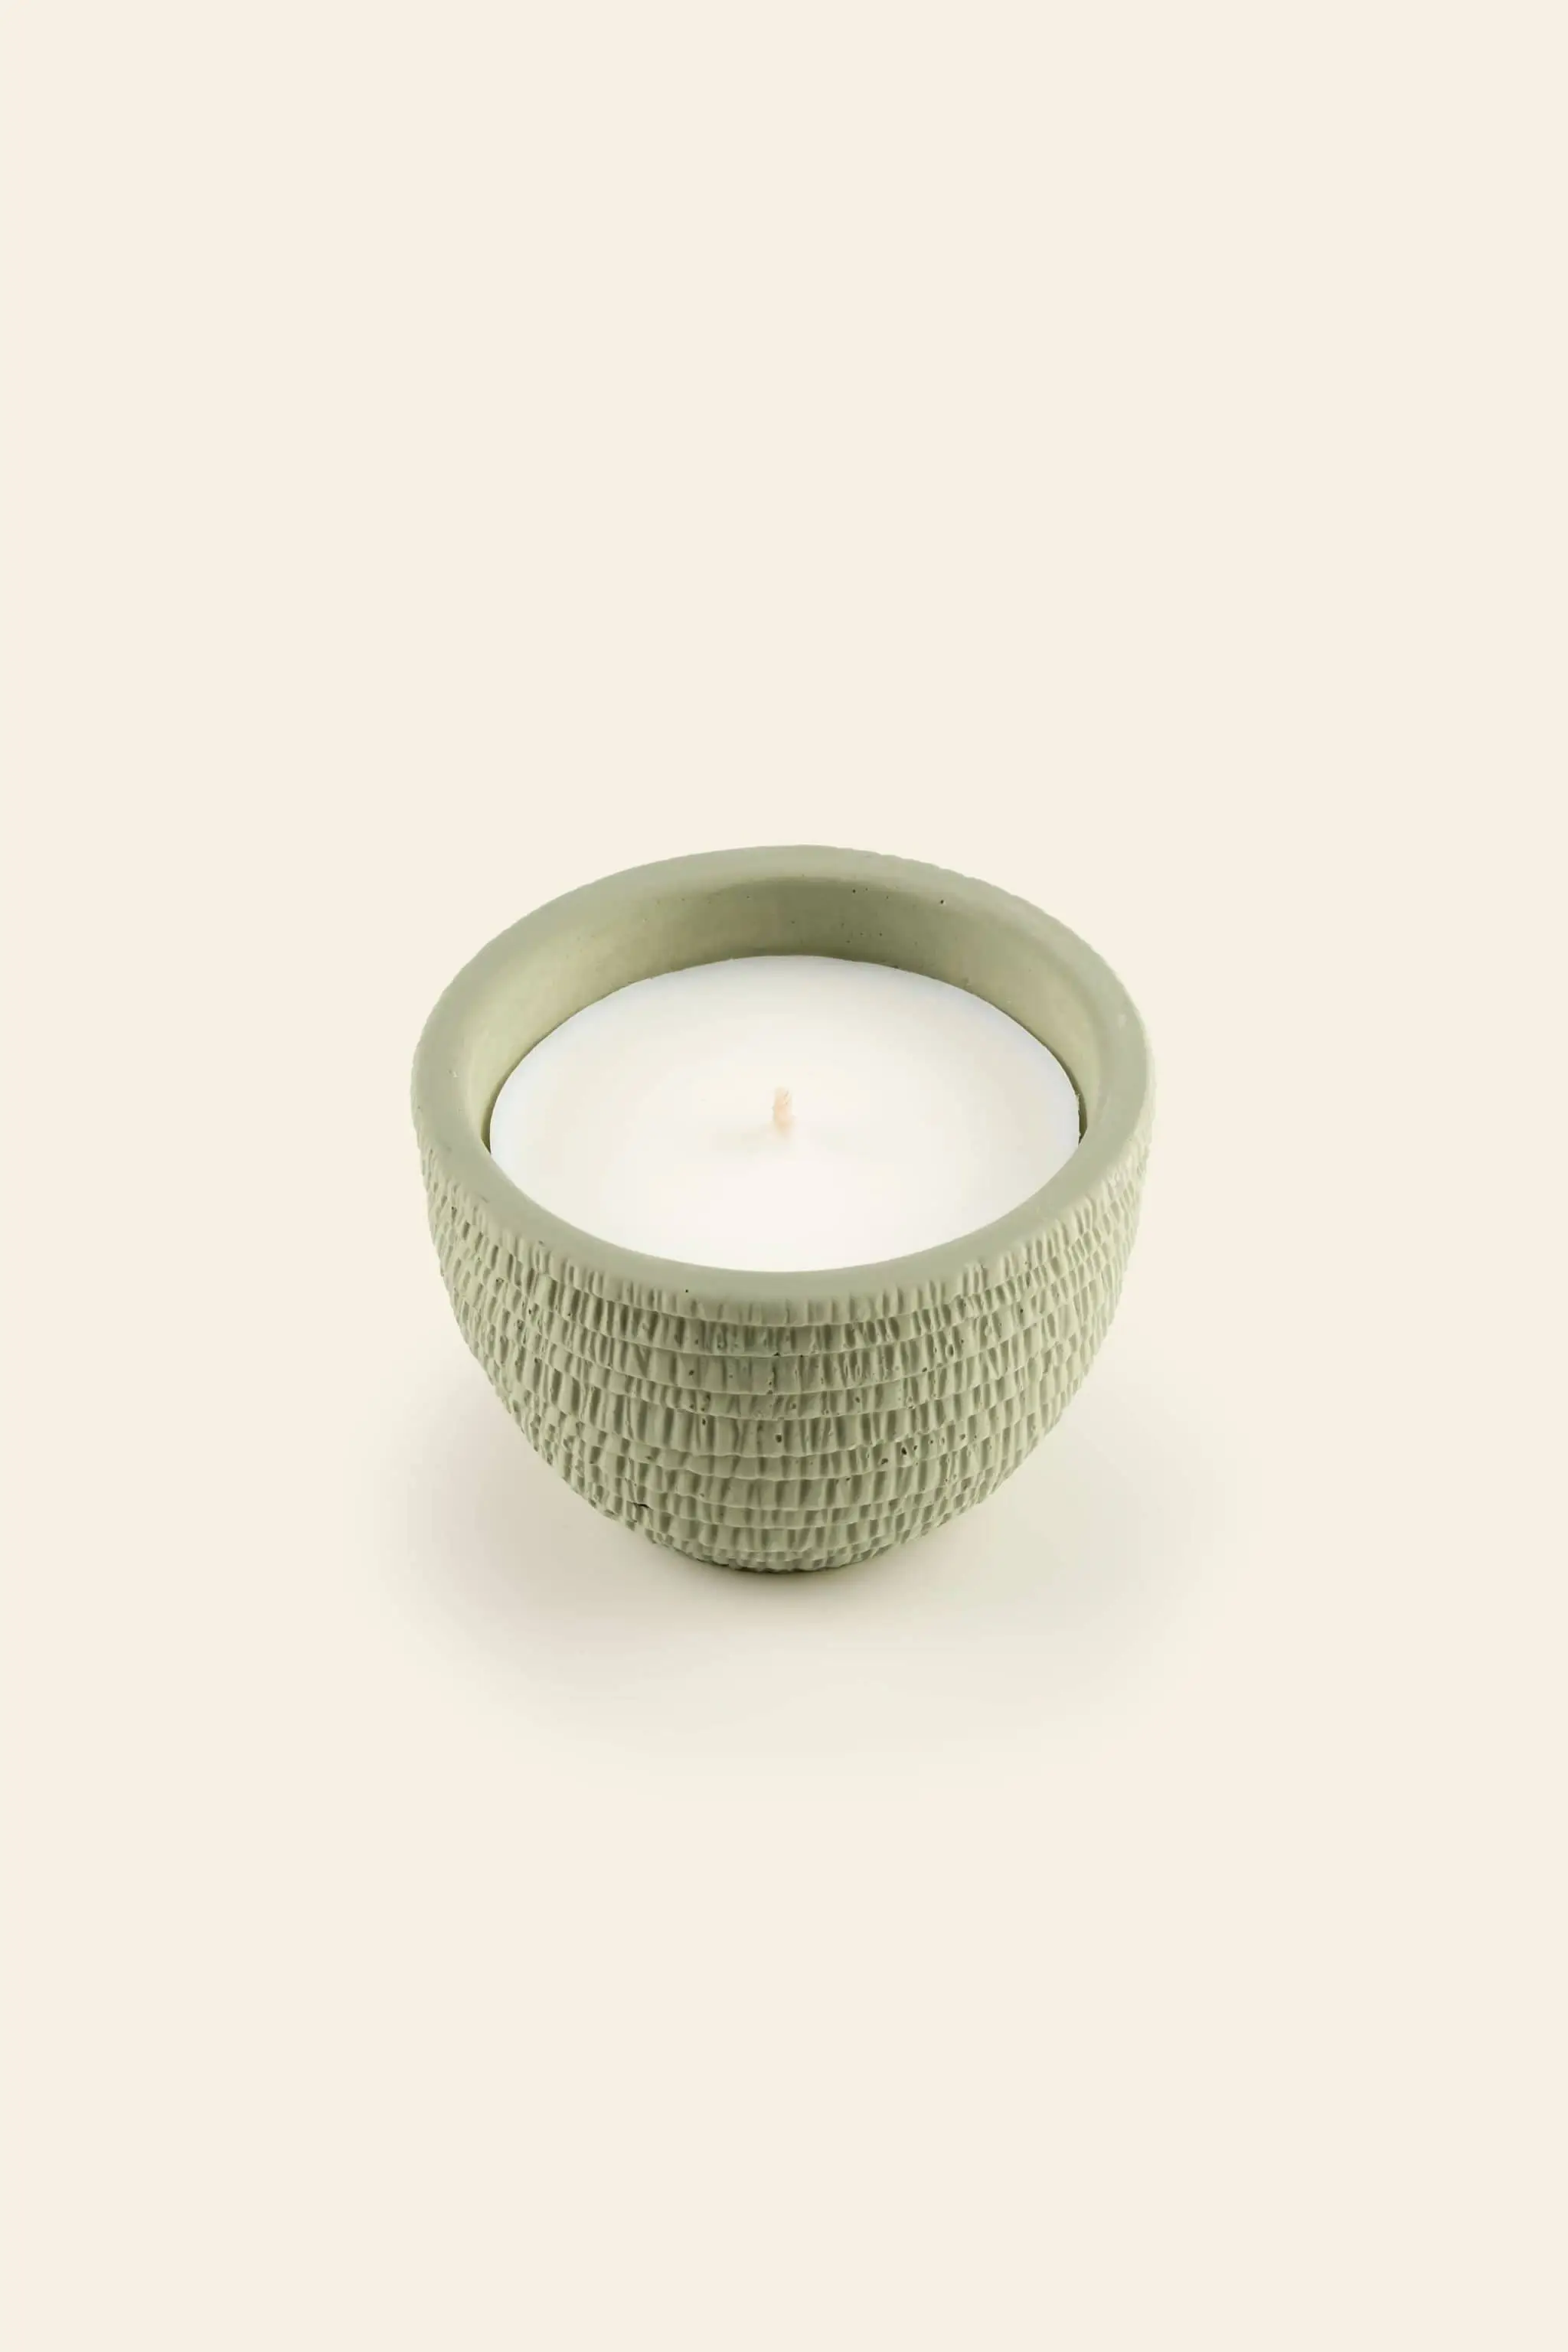 Pass It On Alps Candle Candle 7